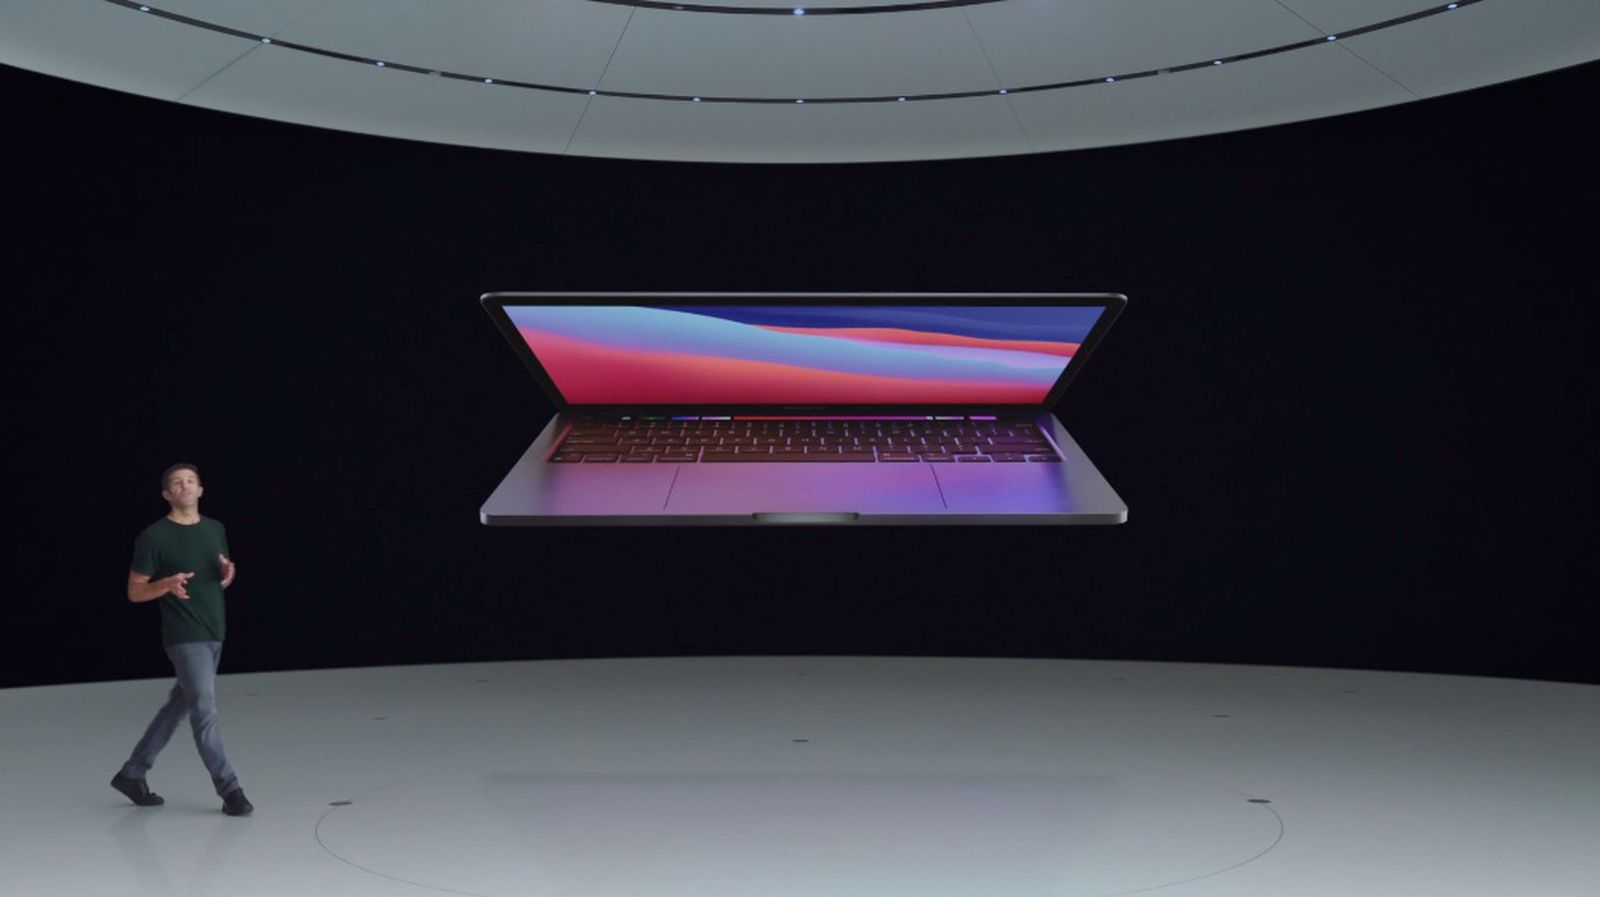 Apple may have a 14-inch MacBook Pro coming later this year, Kuo suggests